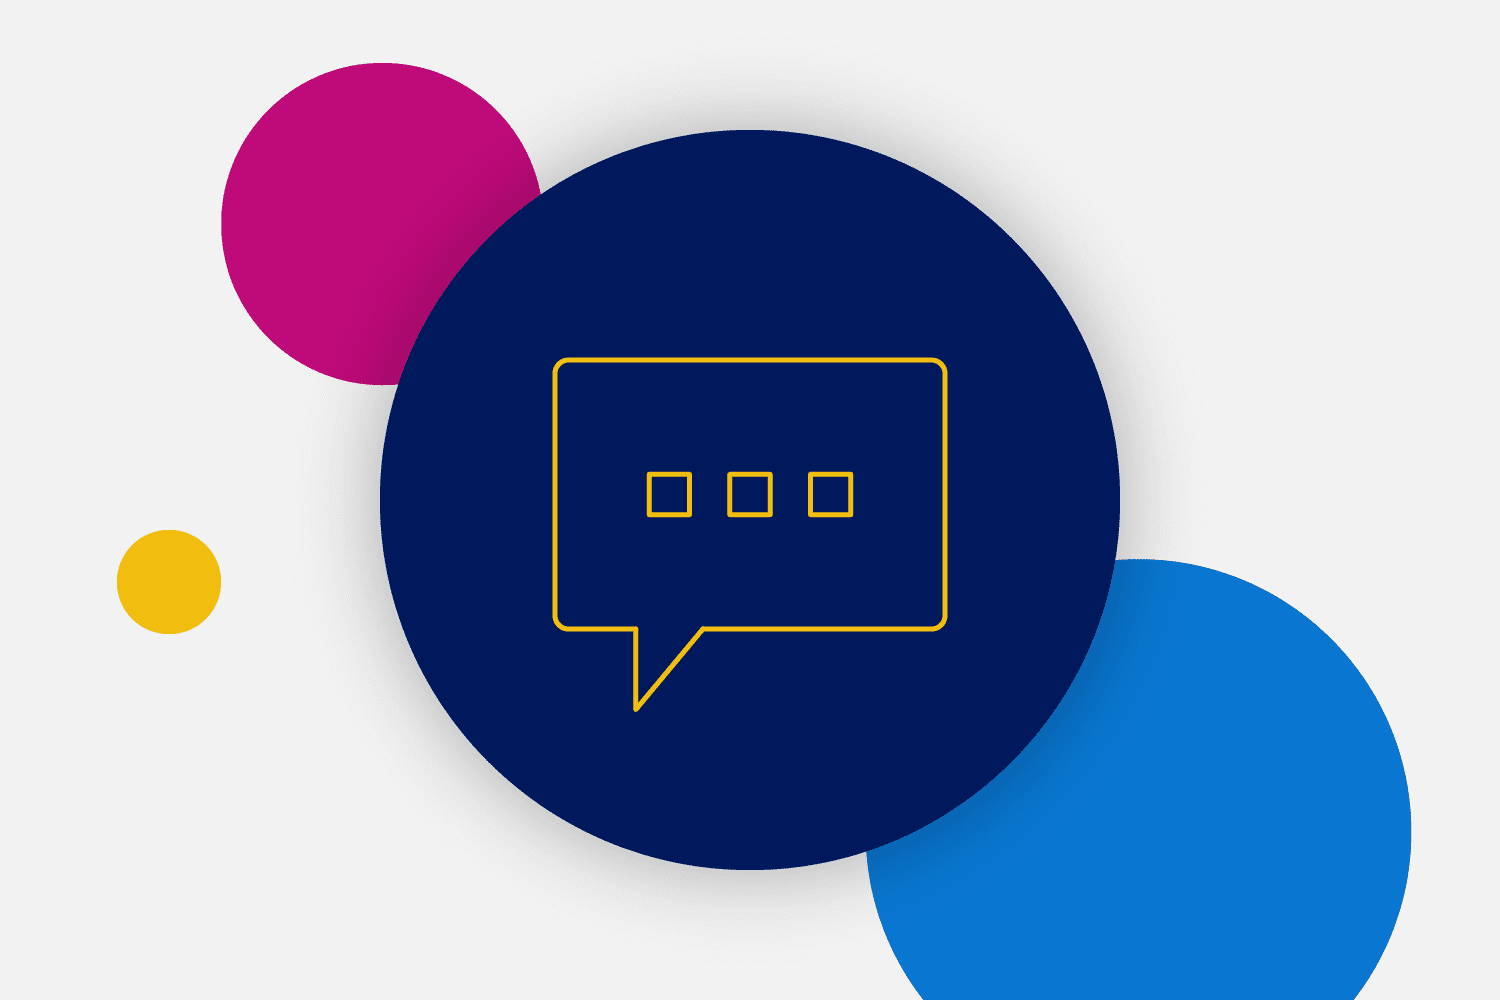 SMS text bubble icon to depict our February demo recap